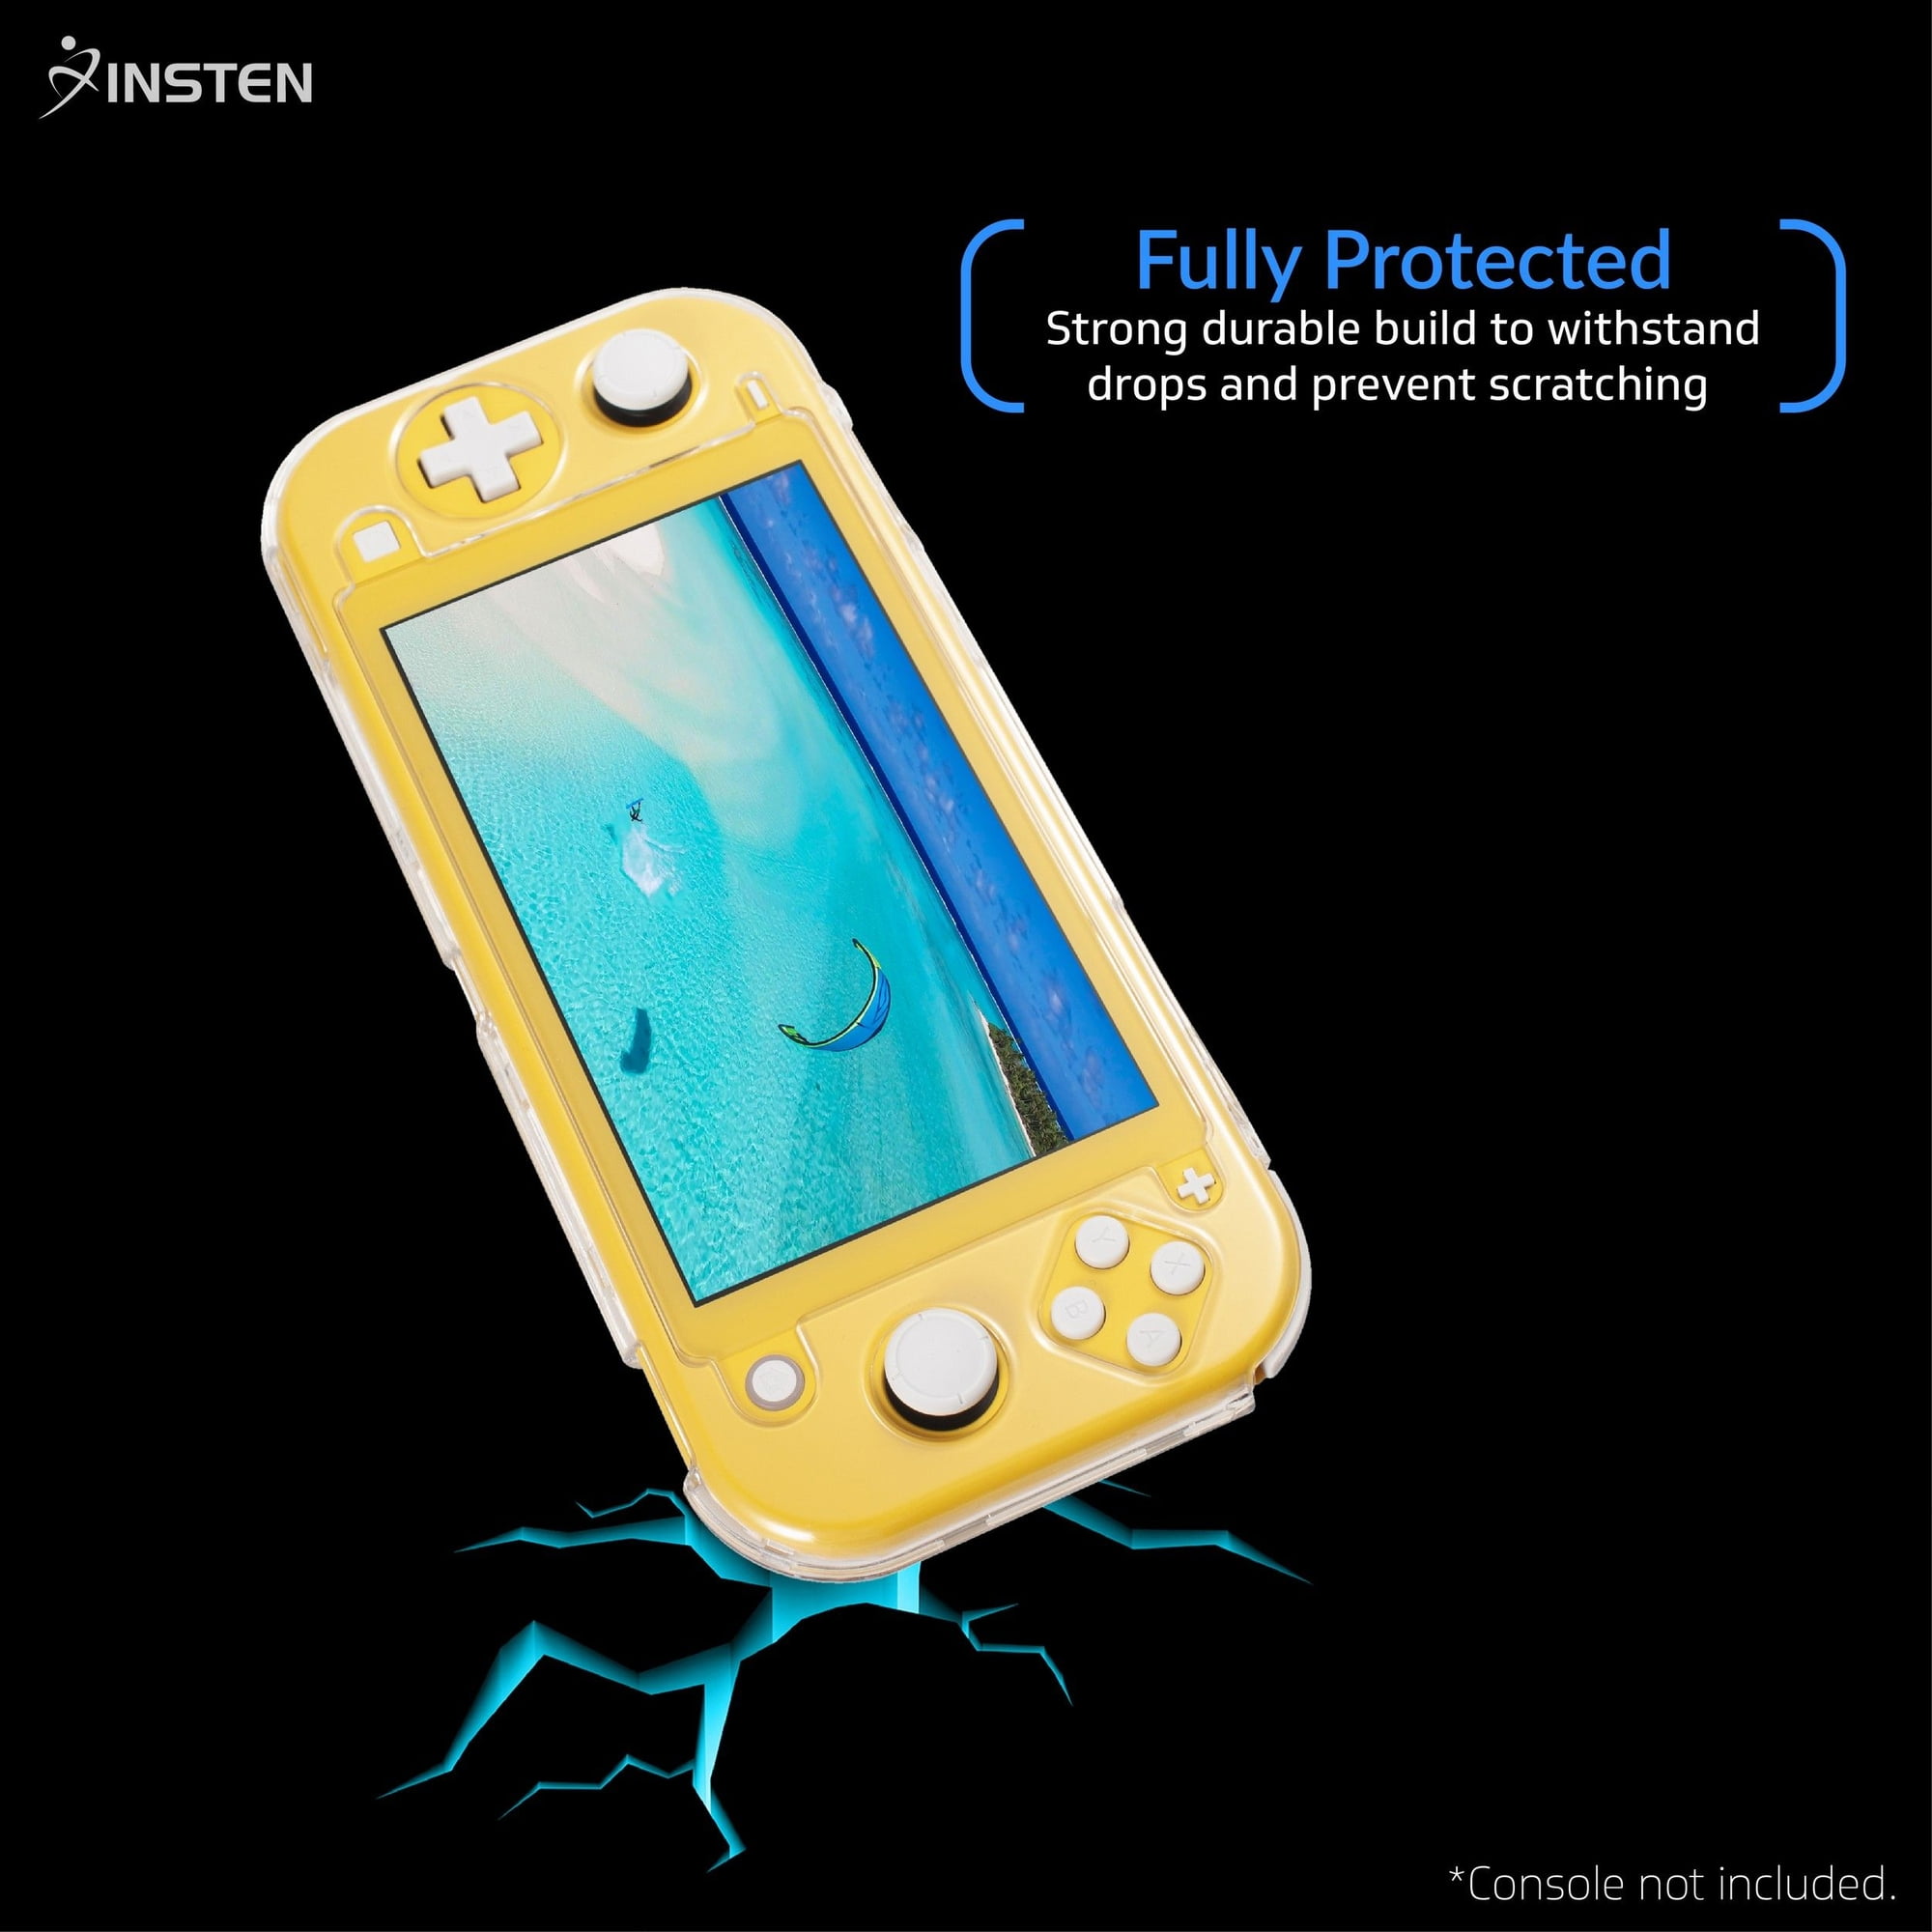 Cute Cartoon Love Stitch Nintendo Switch lite Shell Clear case Protective  cover